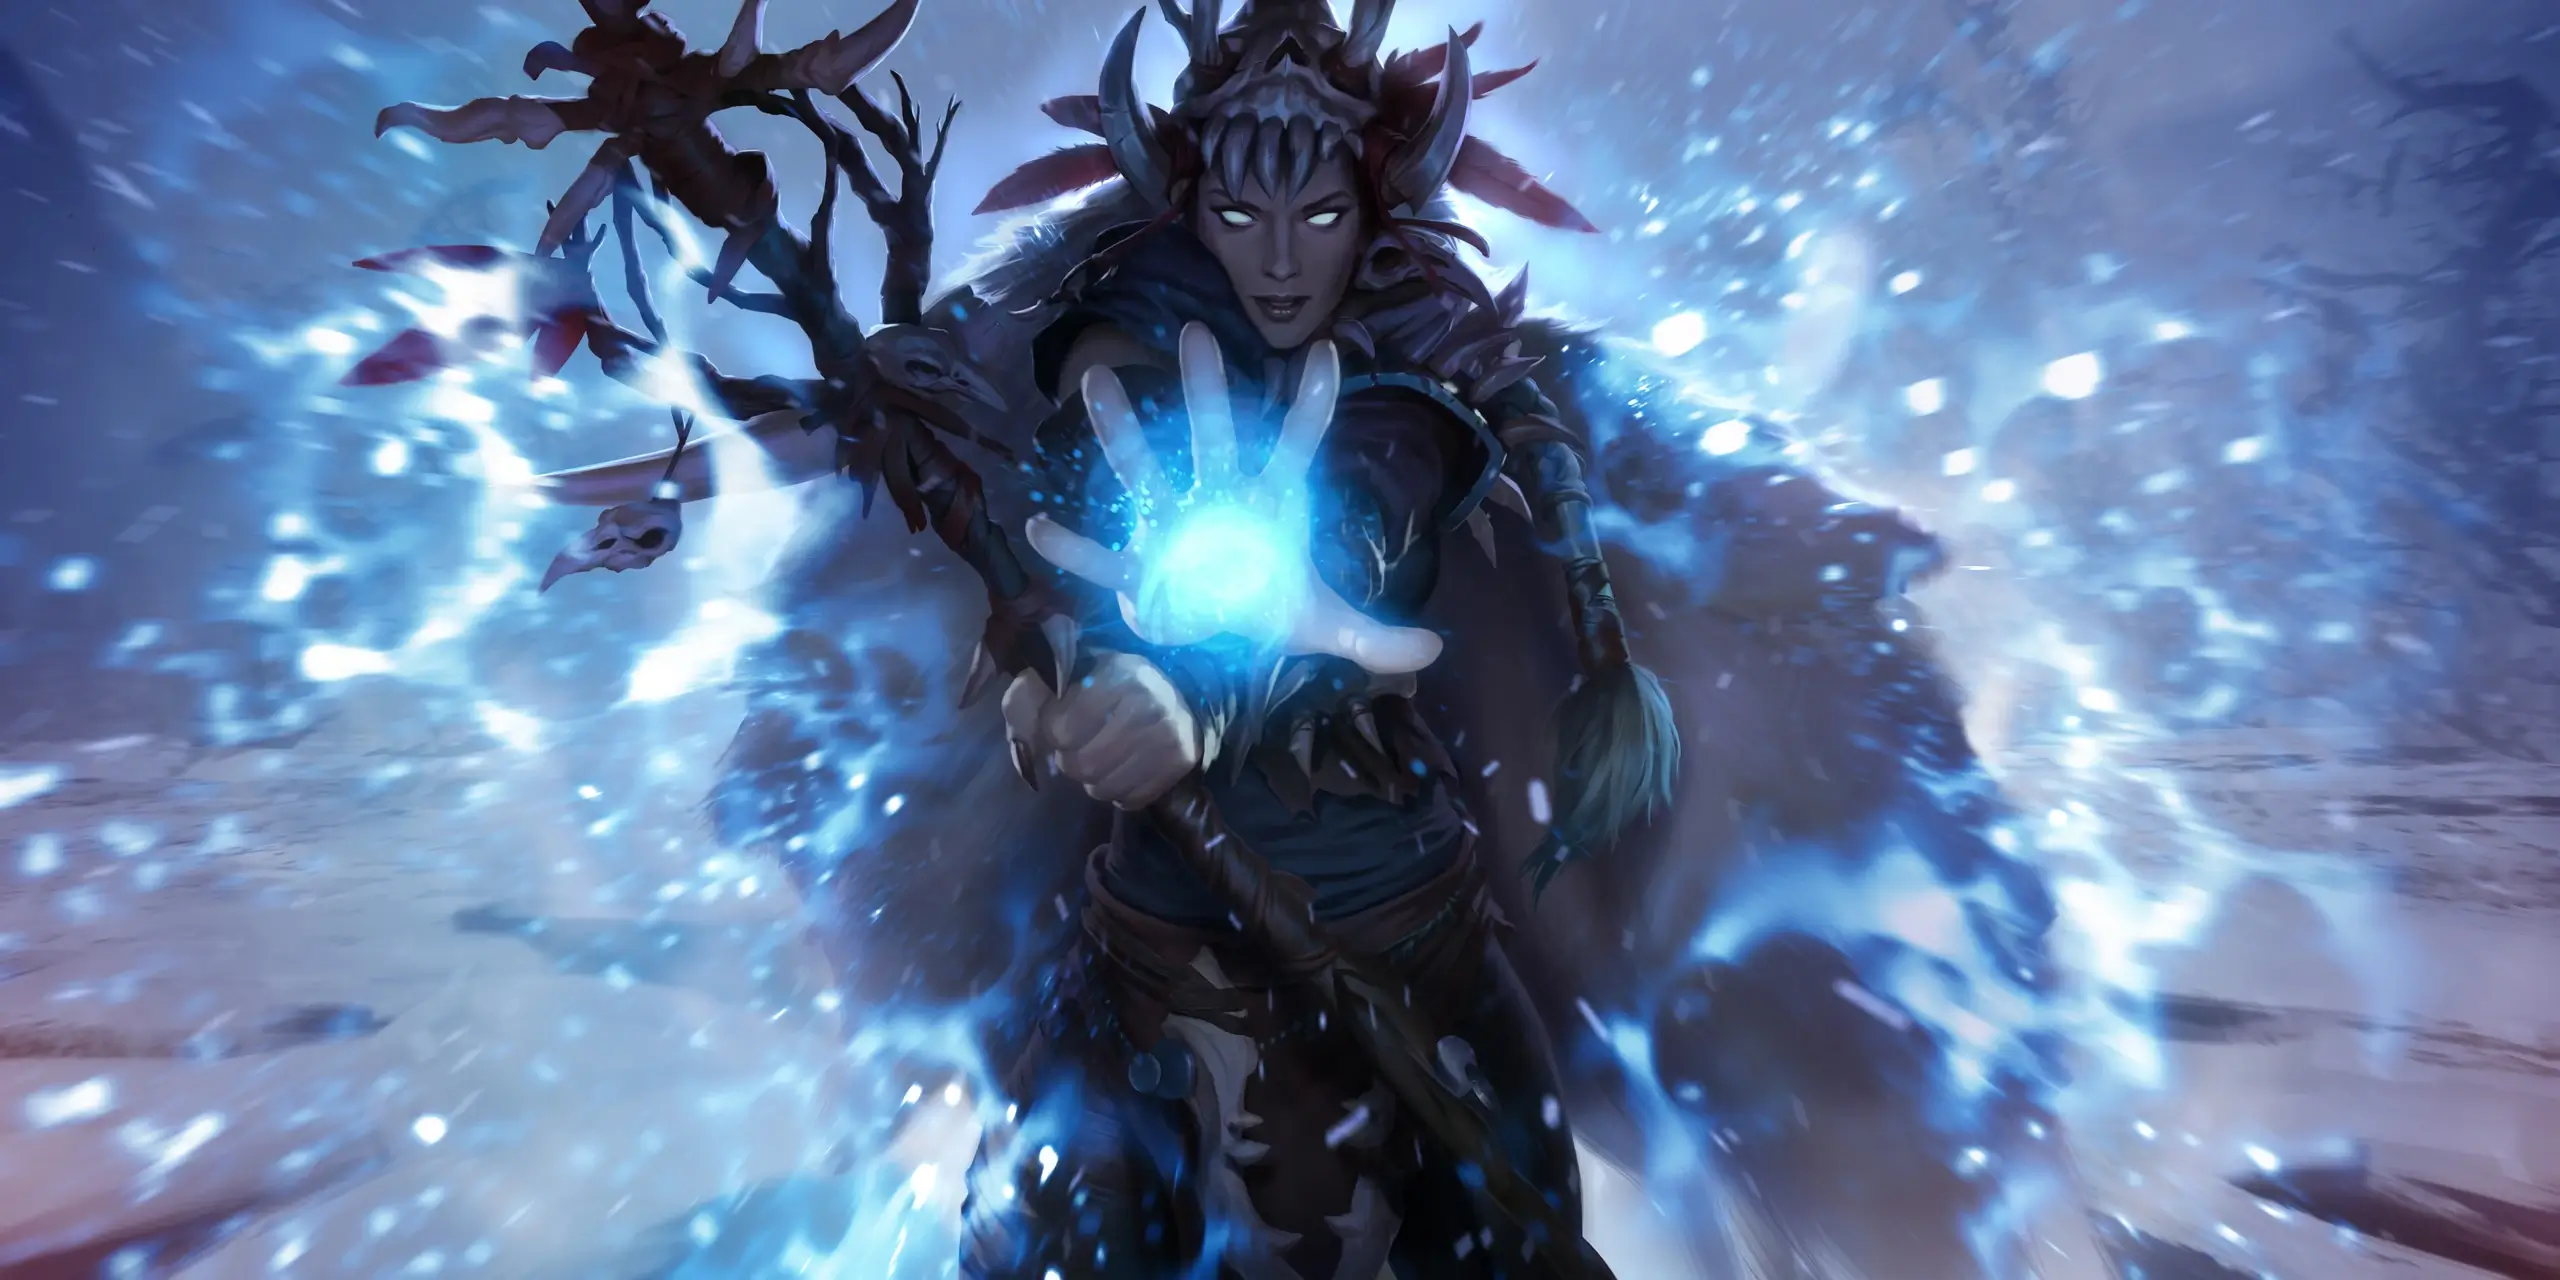 Another one of the Riot MMO classes could be the Shaman, Seer, or Mystic